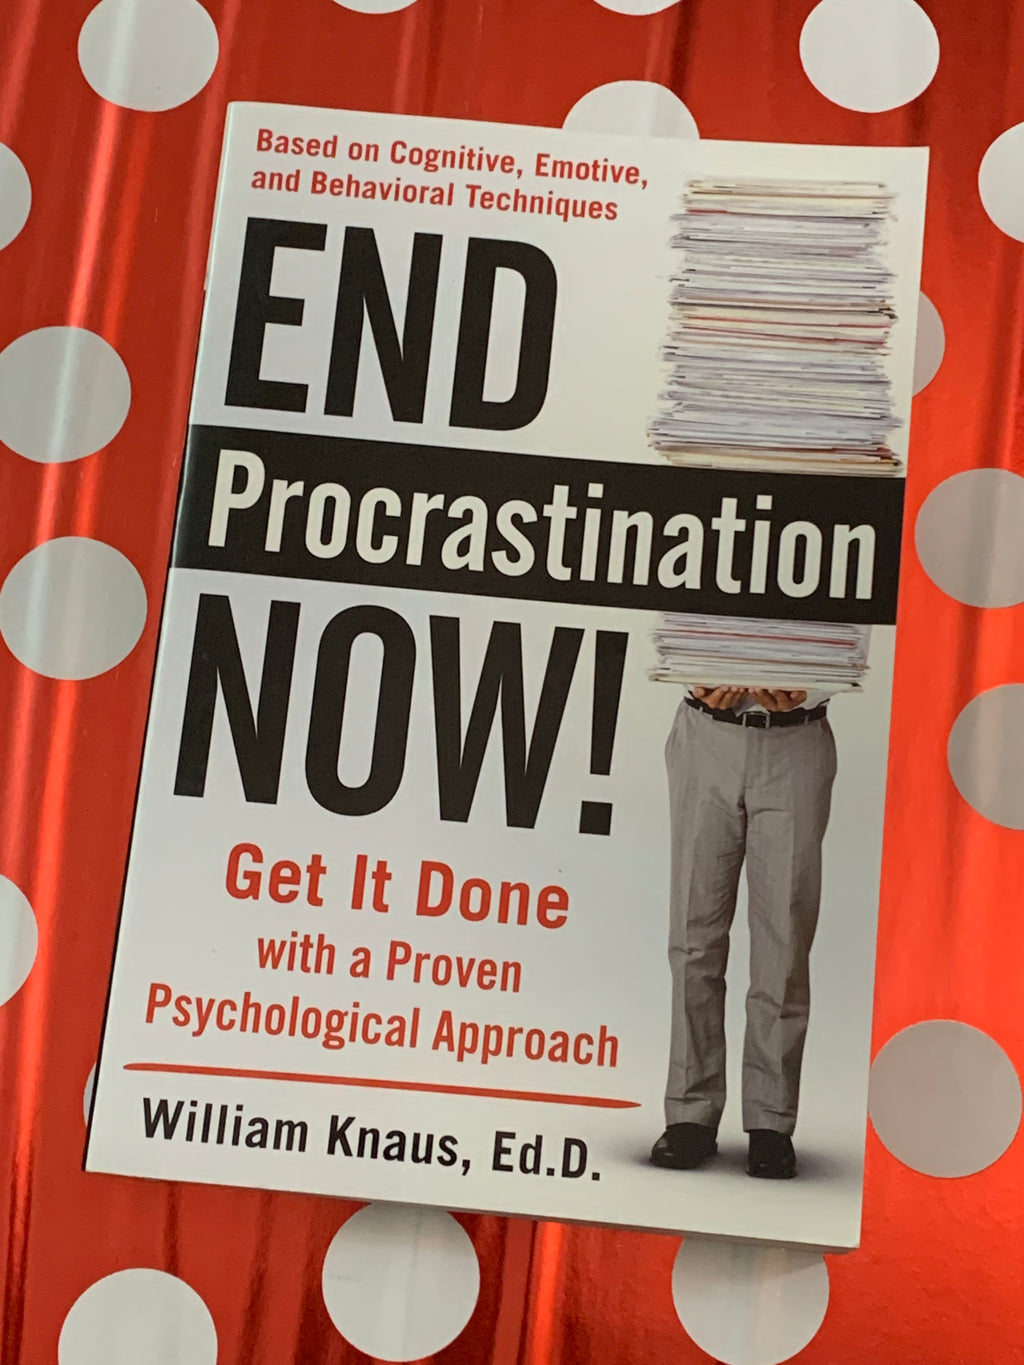 End Procrastination NOW! Get It Done with a Proven Psychological Approach- By William Knaus, Ed.D.